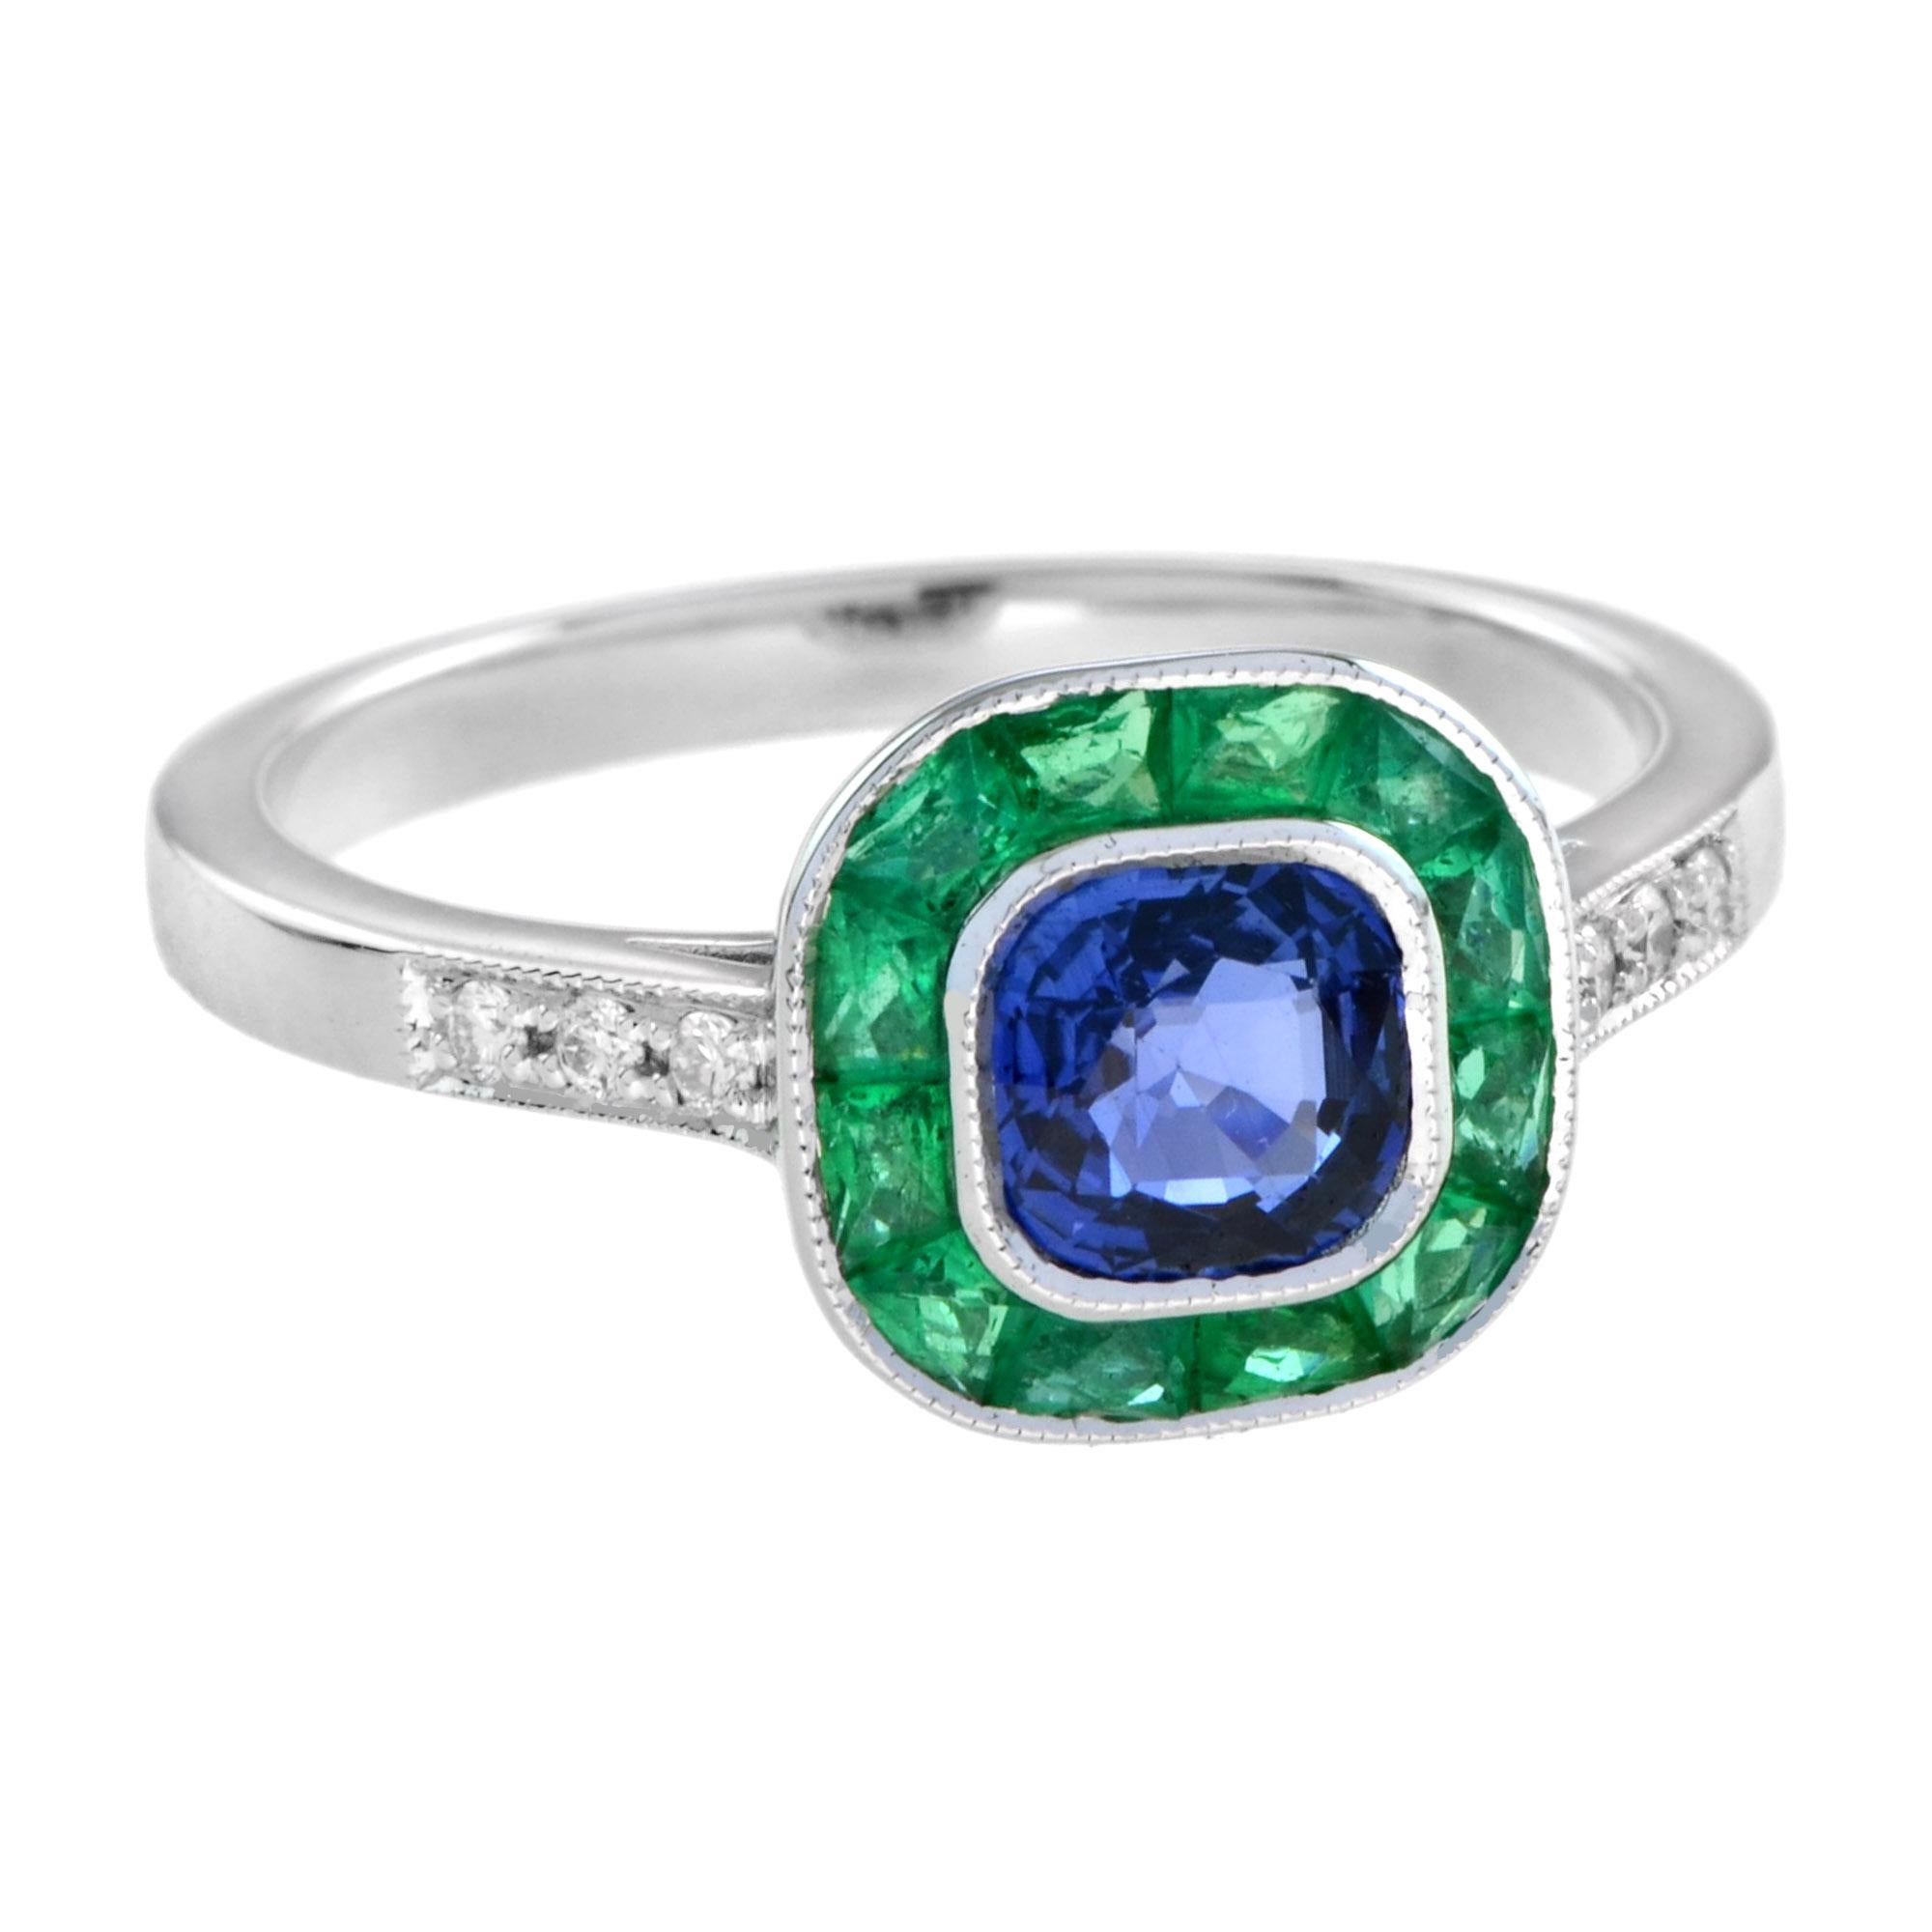 This stunning halo ring sparkles in lustrous 18k white gold and features a cushion cut Ceylon sapphire at the center with French cut emerald in beautiful halo designs. Adorn yourself with an Art Deco inspired jewelry in every occasion in your